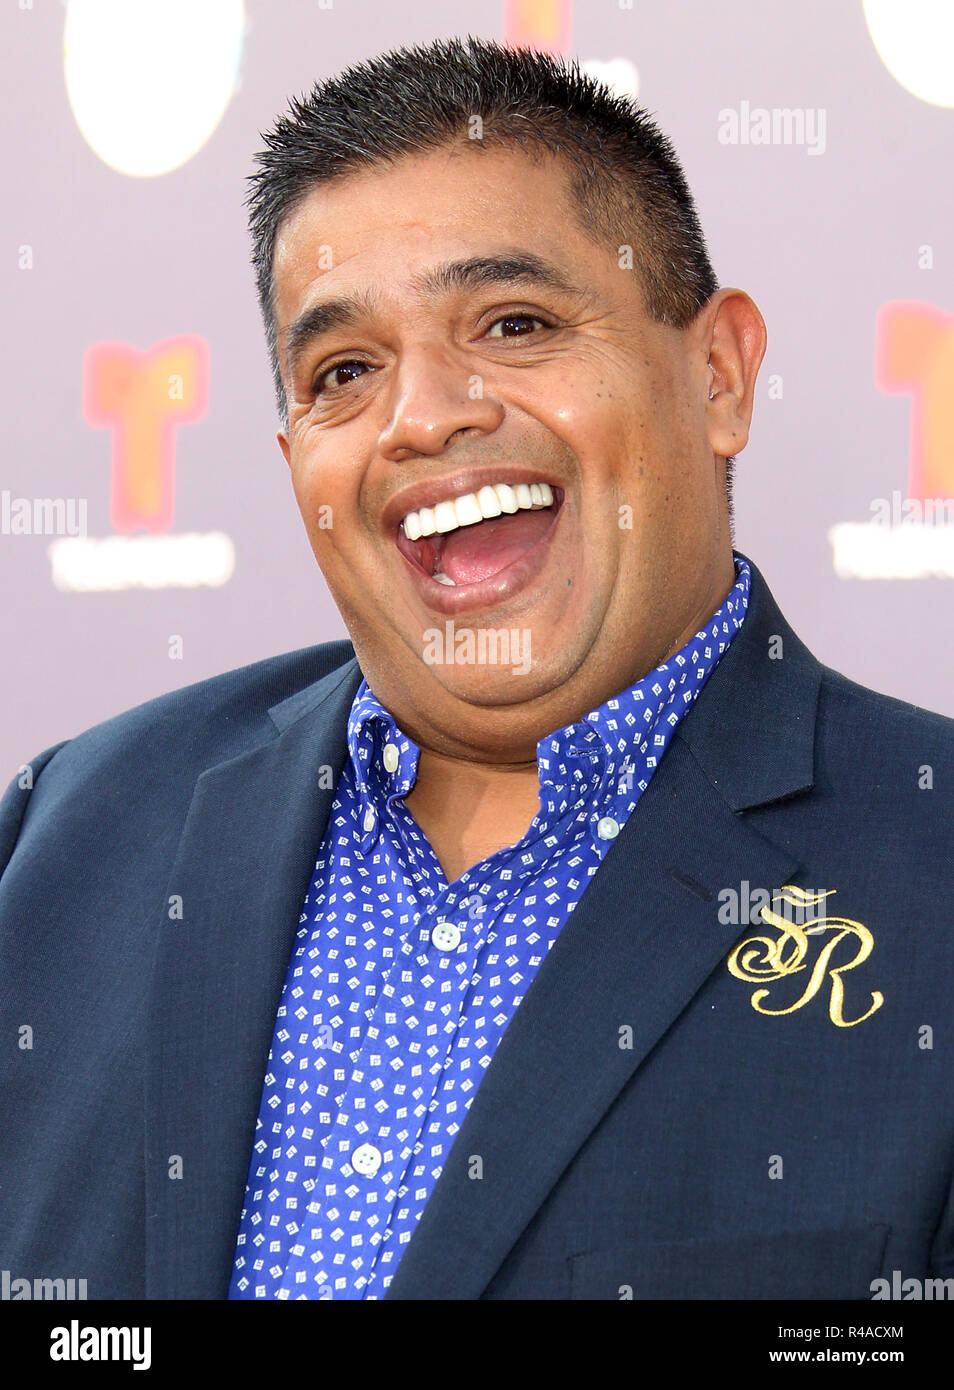 Latin American Music Awards 2018 held at the Dolby Theatre in Los Angeles, California.  Featuring: El Mandril Where: Los Angeles, California, United States When: 25 Oct 2018 Credit: Adriana M. Barraza/WENN.com Stock Photo